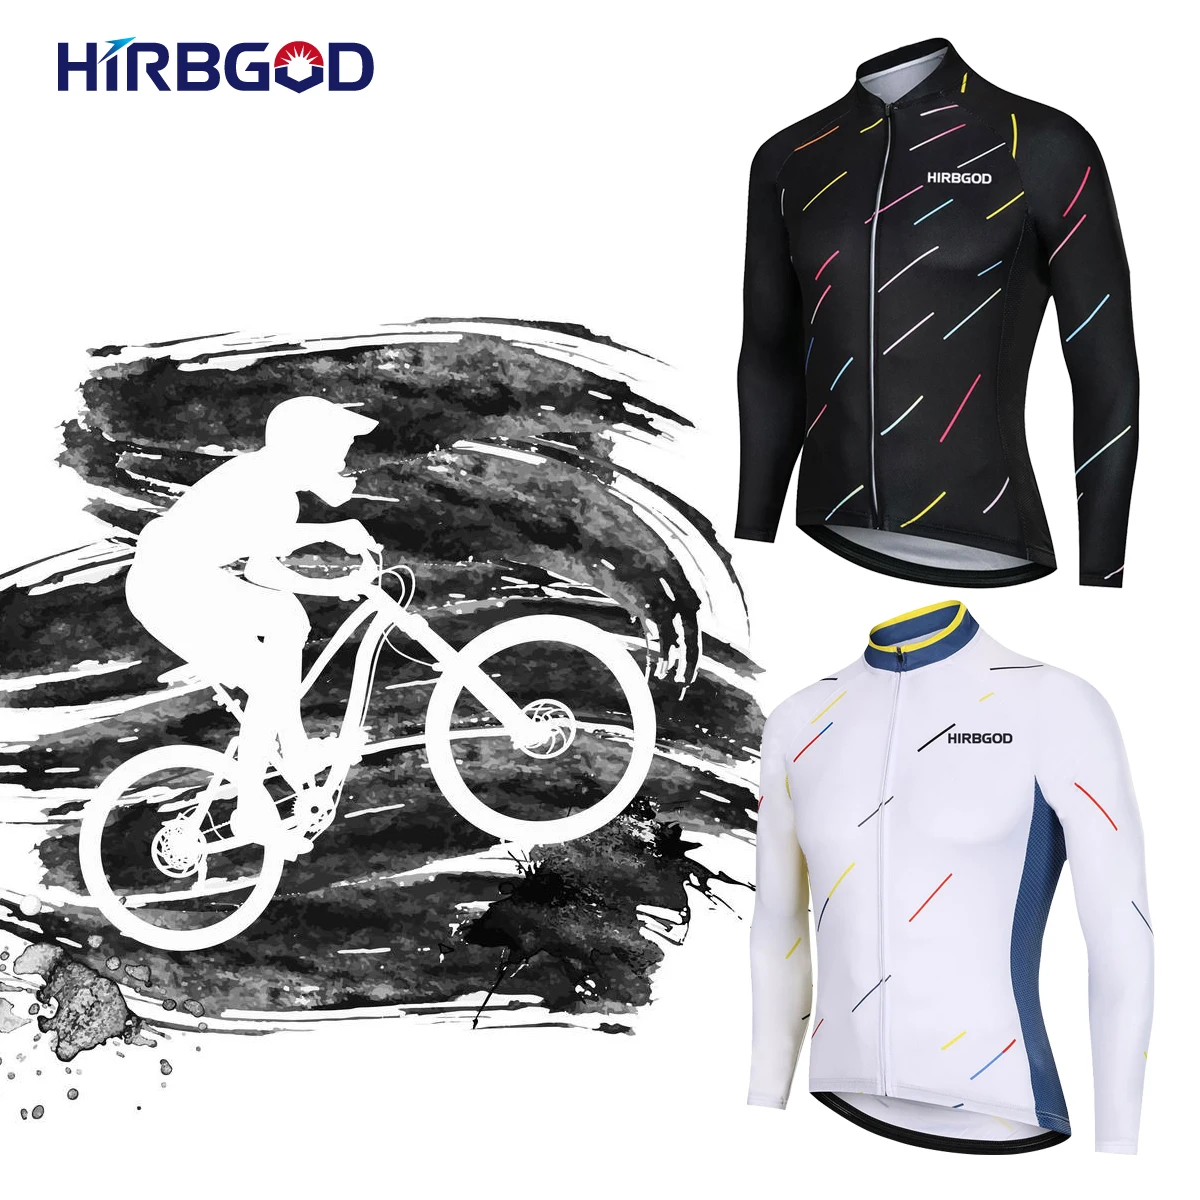 

HIRBGOD Men's With Reflective Effect Cycling Jersey New Style Spring Long Sleeve Bicycle Clothing Maillot Ciclismo Sportwear